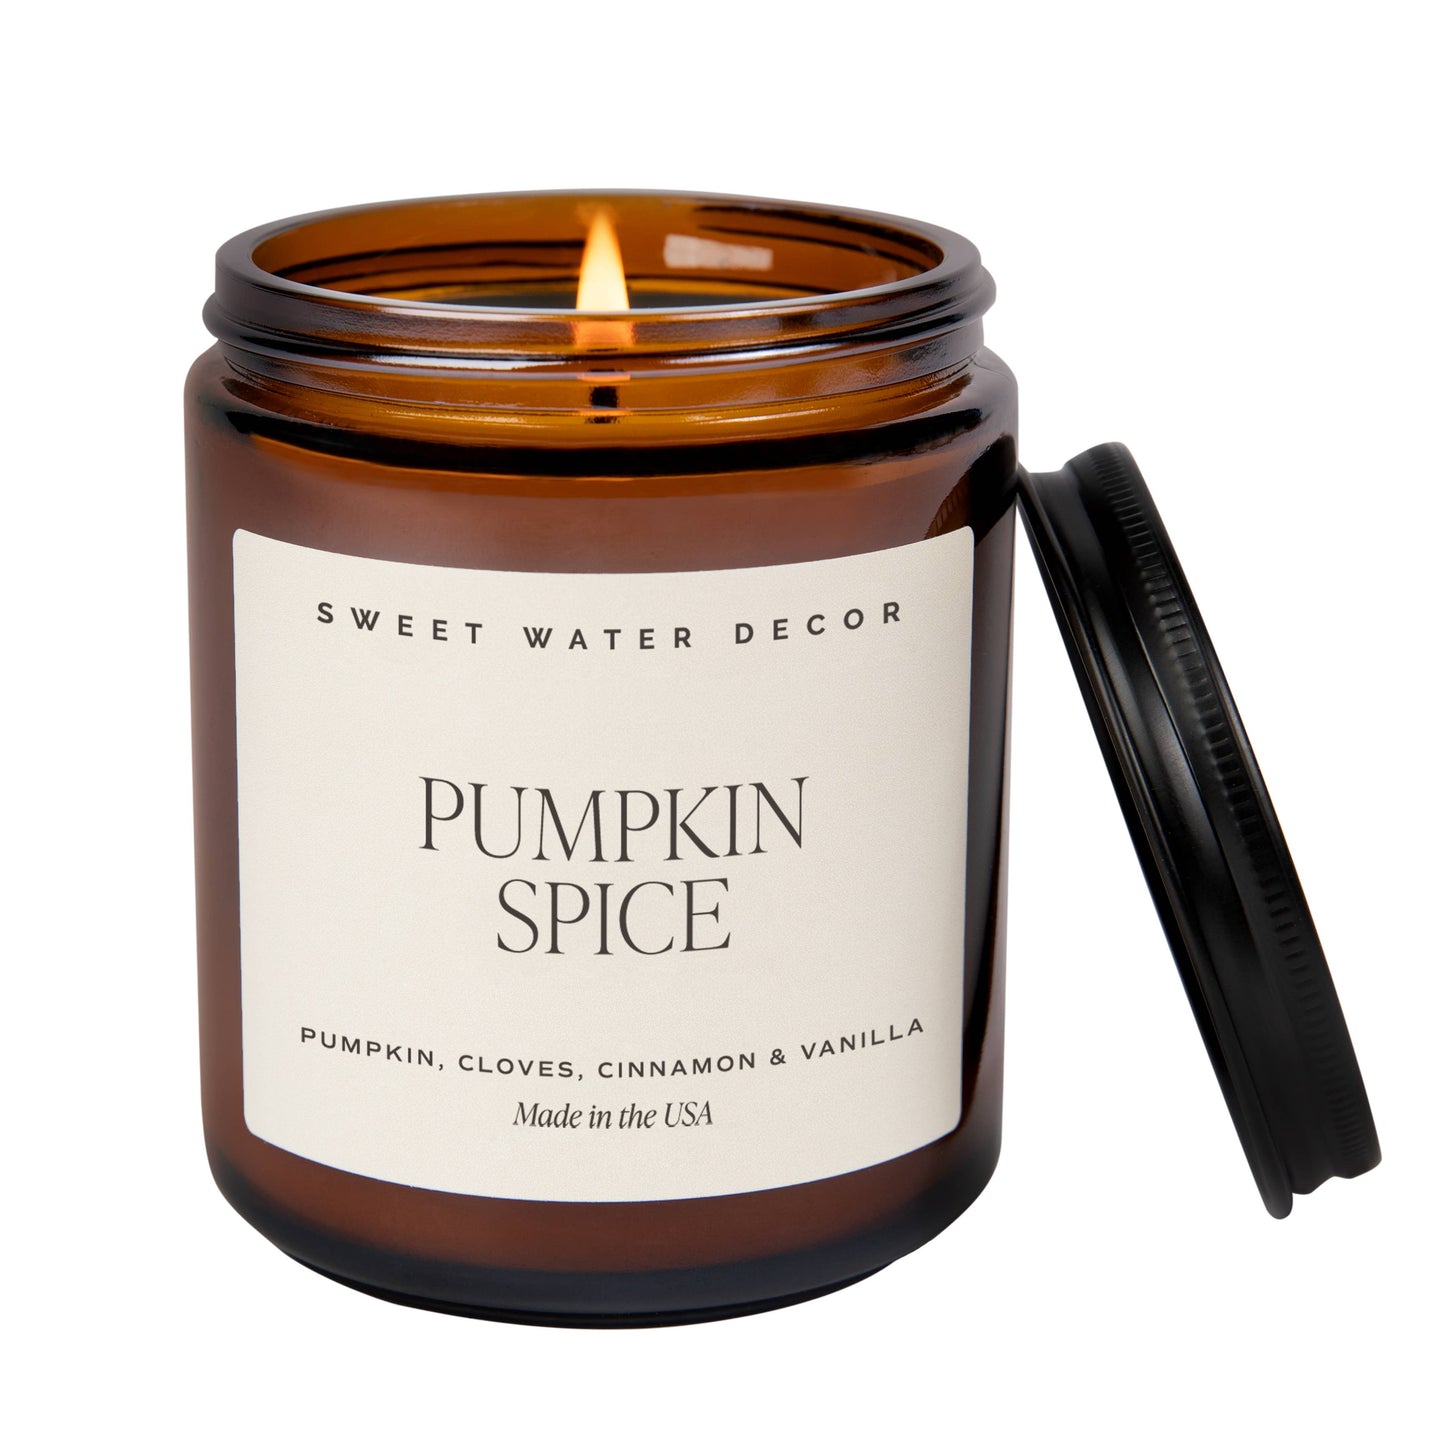 *NEW* Pumpkin Spice 9 oz Soy Candle